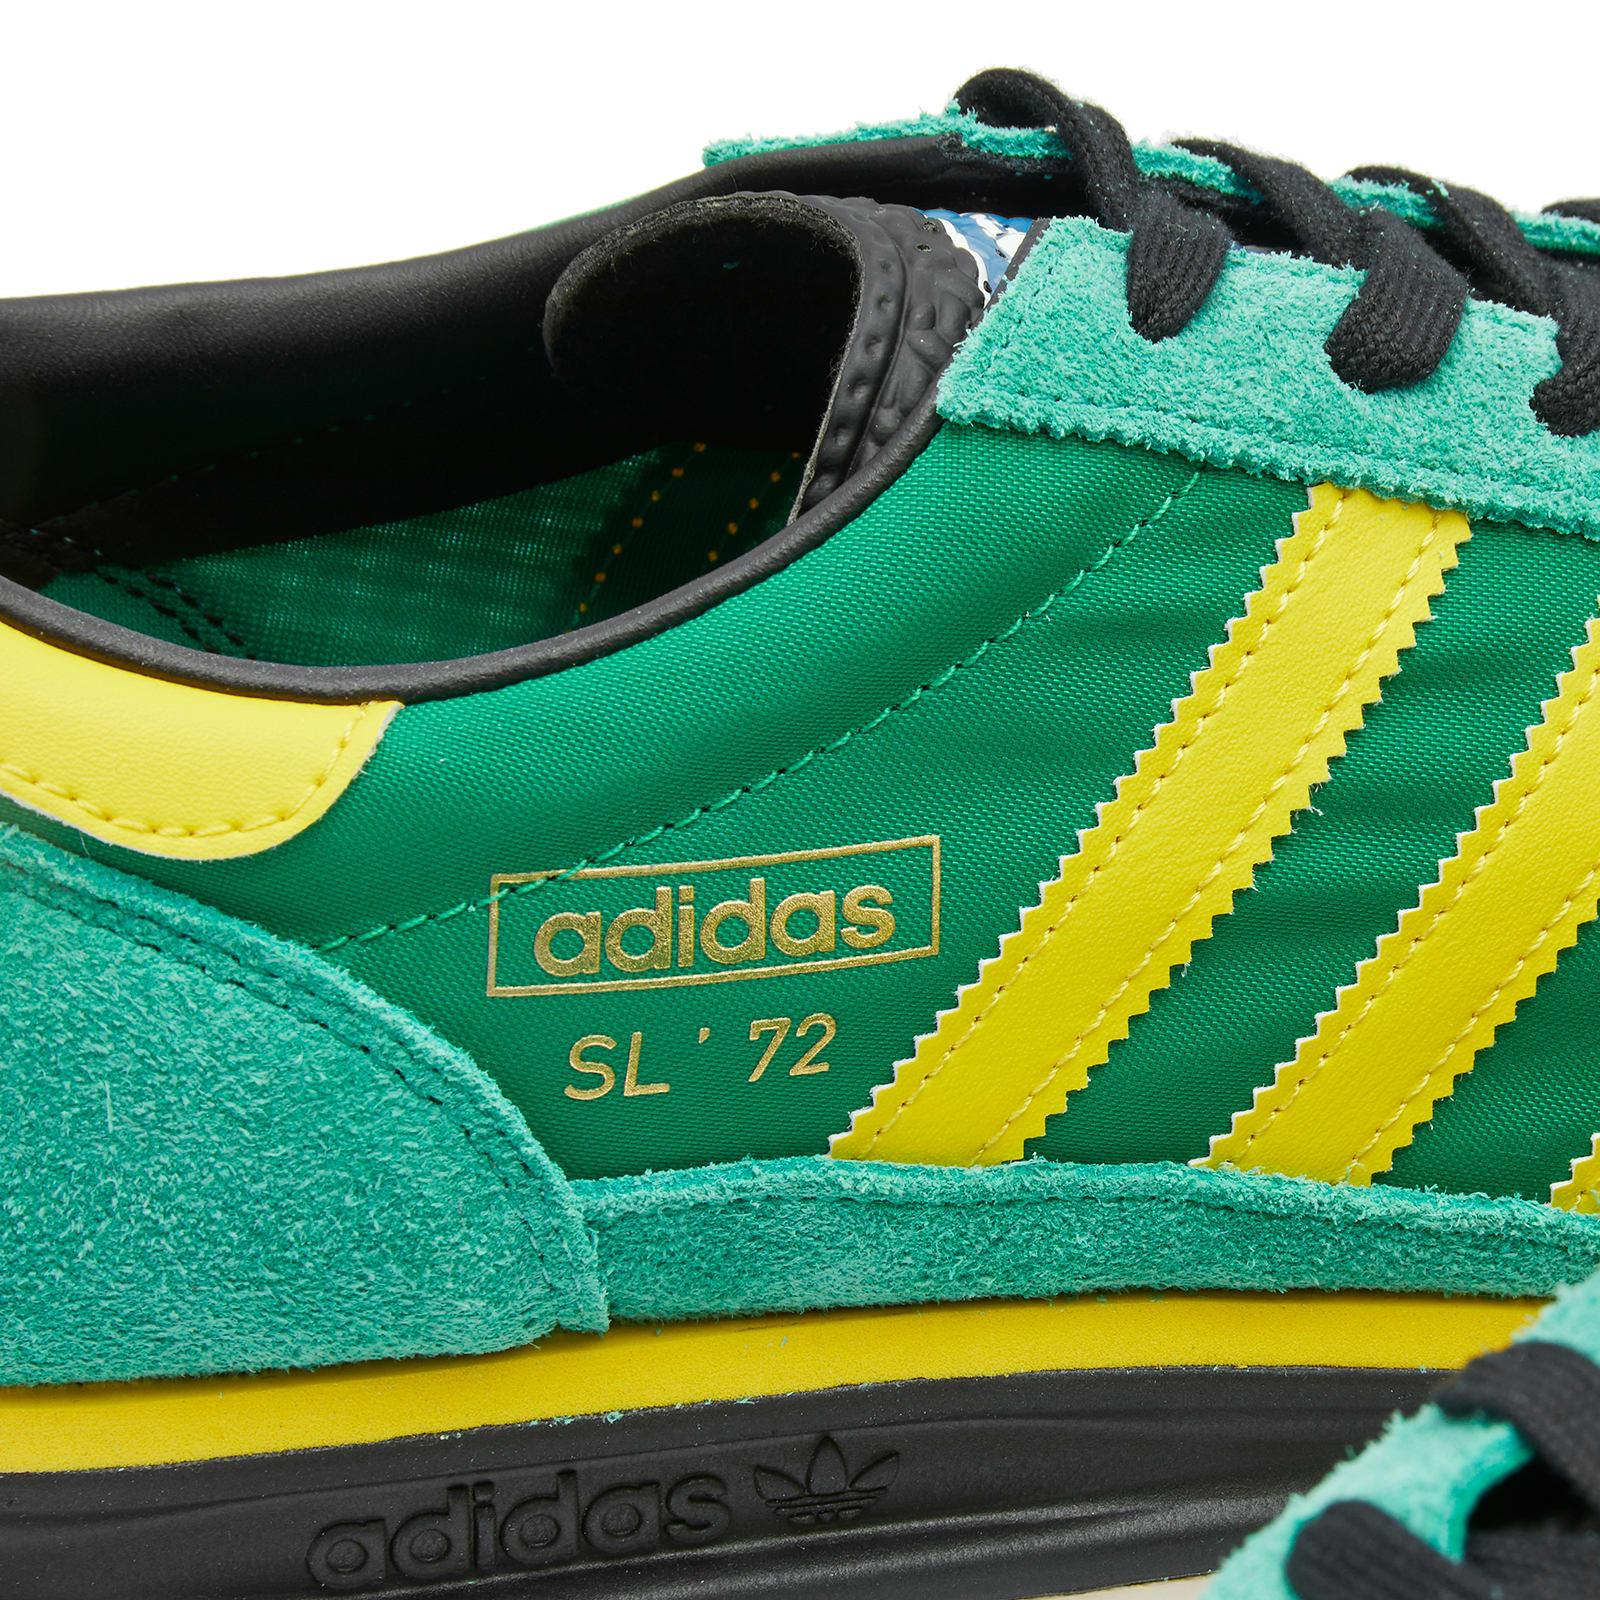 adidas Sl 72 Rs Sneakers in Green | Lyst